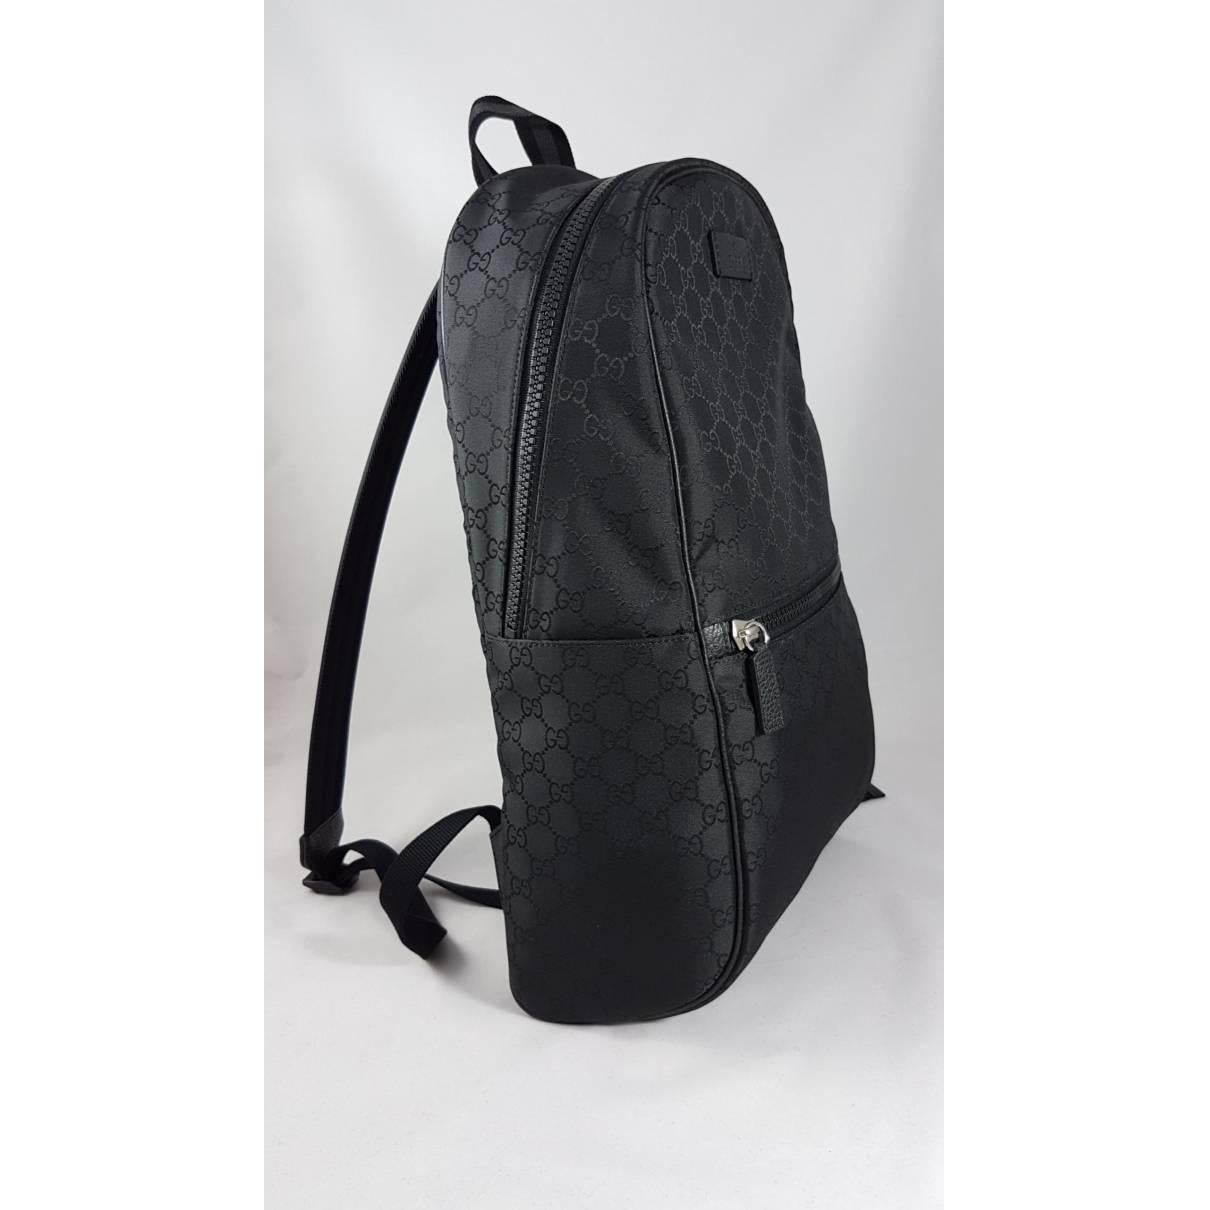 Gucci Black GG Guccissima Backpack Bag In New Condition For Sale In Los Angeles, CA